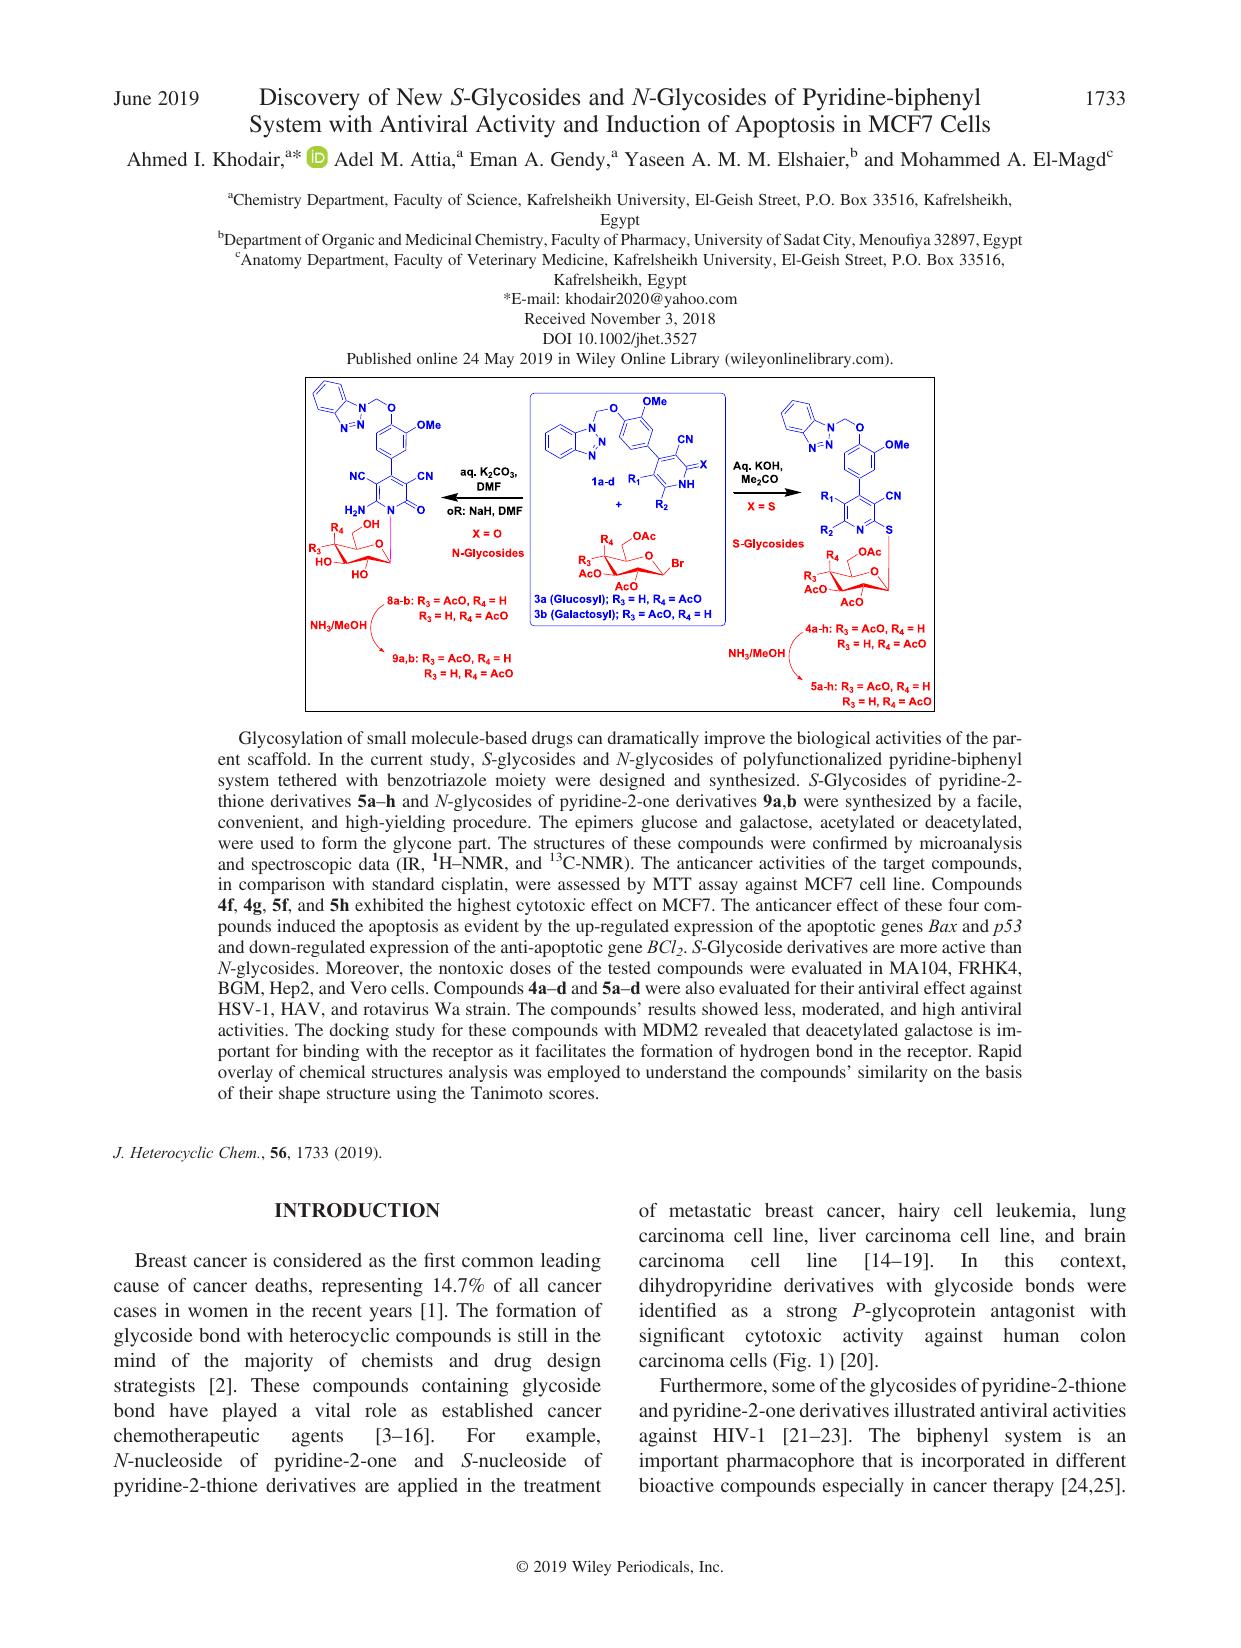 Discovery of New S-Glycosides and N-Glycosides of Pyridine-biphenyl System with Antiviral Activity and Induction of Apoptosis in MCF7 Cells by Ahmed I. Khodair Adel M. Attia Eman A. Gendy Yaseen A. M. M. Elshaier Mohammed A. El-Magd